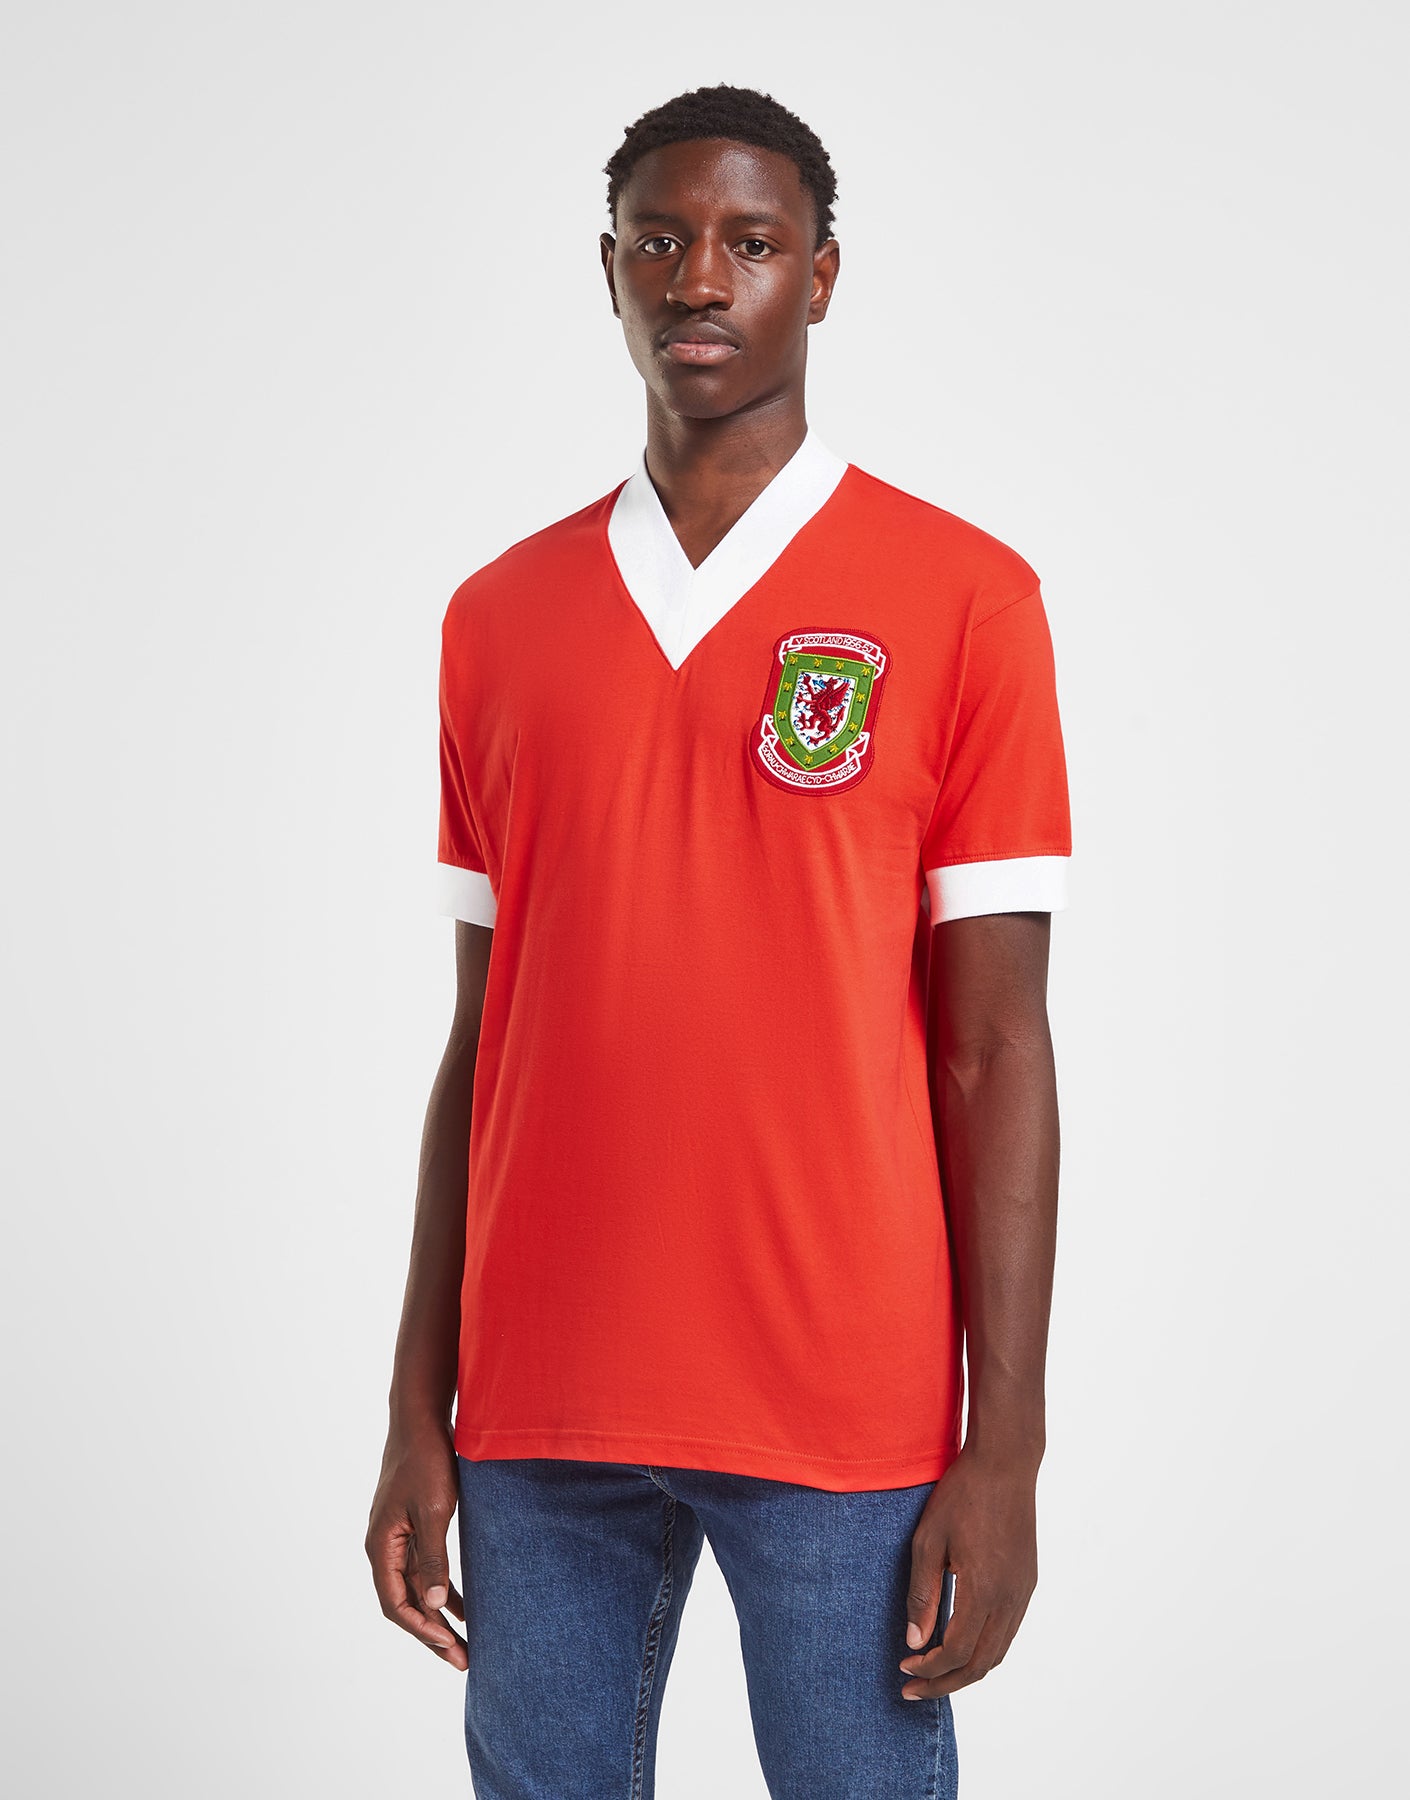 Official Team Wales 1958 Retro Jersey - Red - The World Football Store